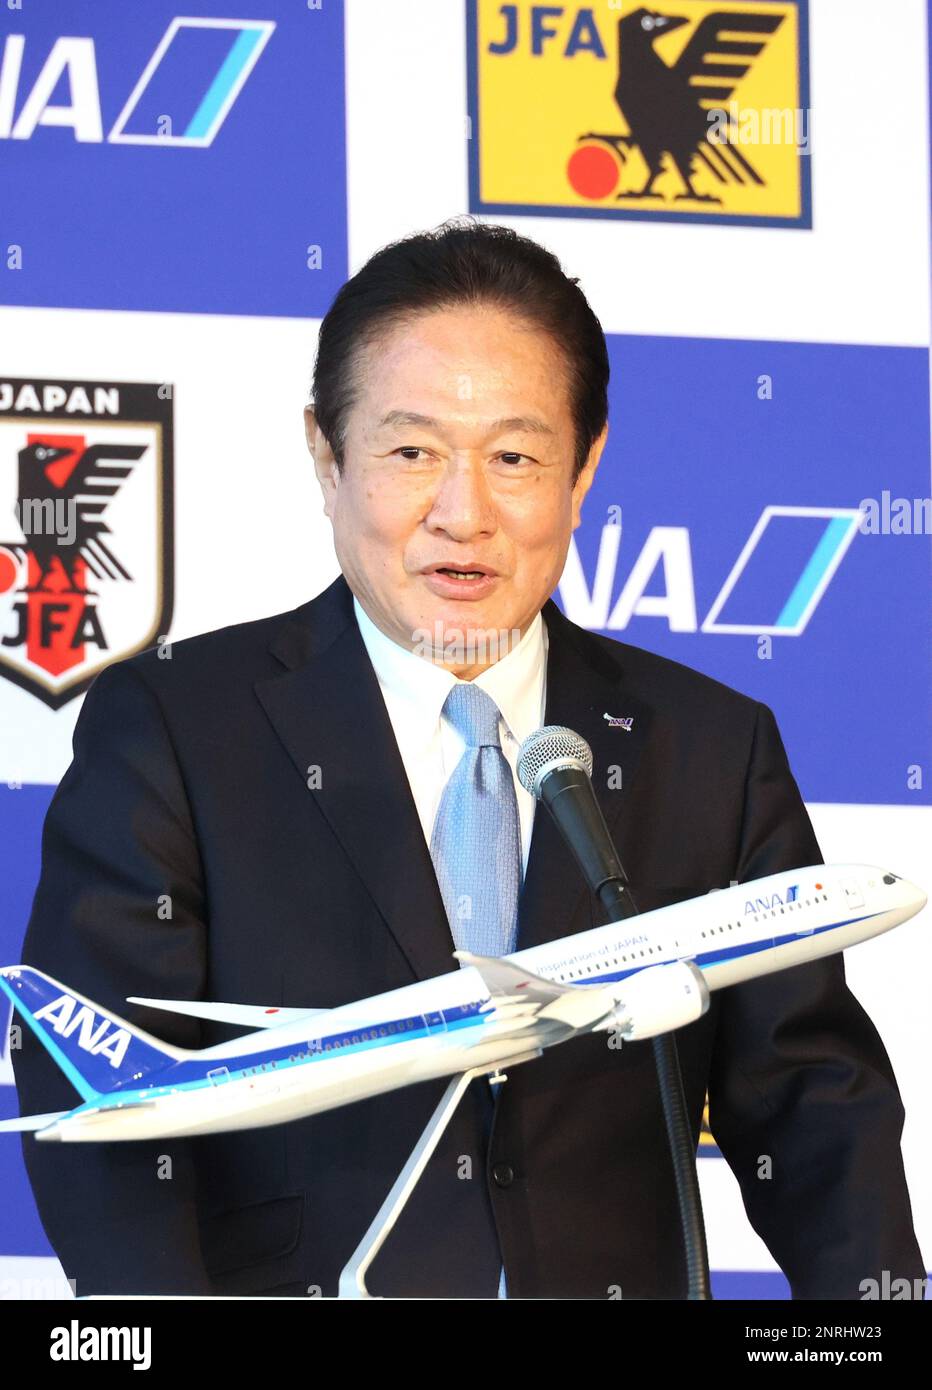 Tokyo, Japan. 27th Feb, 2023. All Nippon Airways (ANA) president Shinichi Inoue delivers a speech as ANA and Japan Football Association (JFA) agreed contract of their partnership at the ANA hangar at Tokyo's Haneda airport on Monday, February 27, 2023. ANA will support Japan national team's domestic and international tours from 2023 February to end of 2026. (photo by Yoshio Tsunoda/AFLO) Credit: Aflo Co. Ltd./Alamy Live News Stock Photo